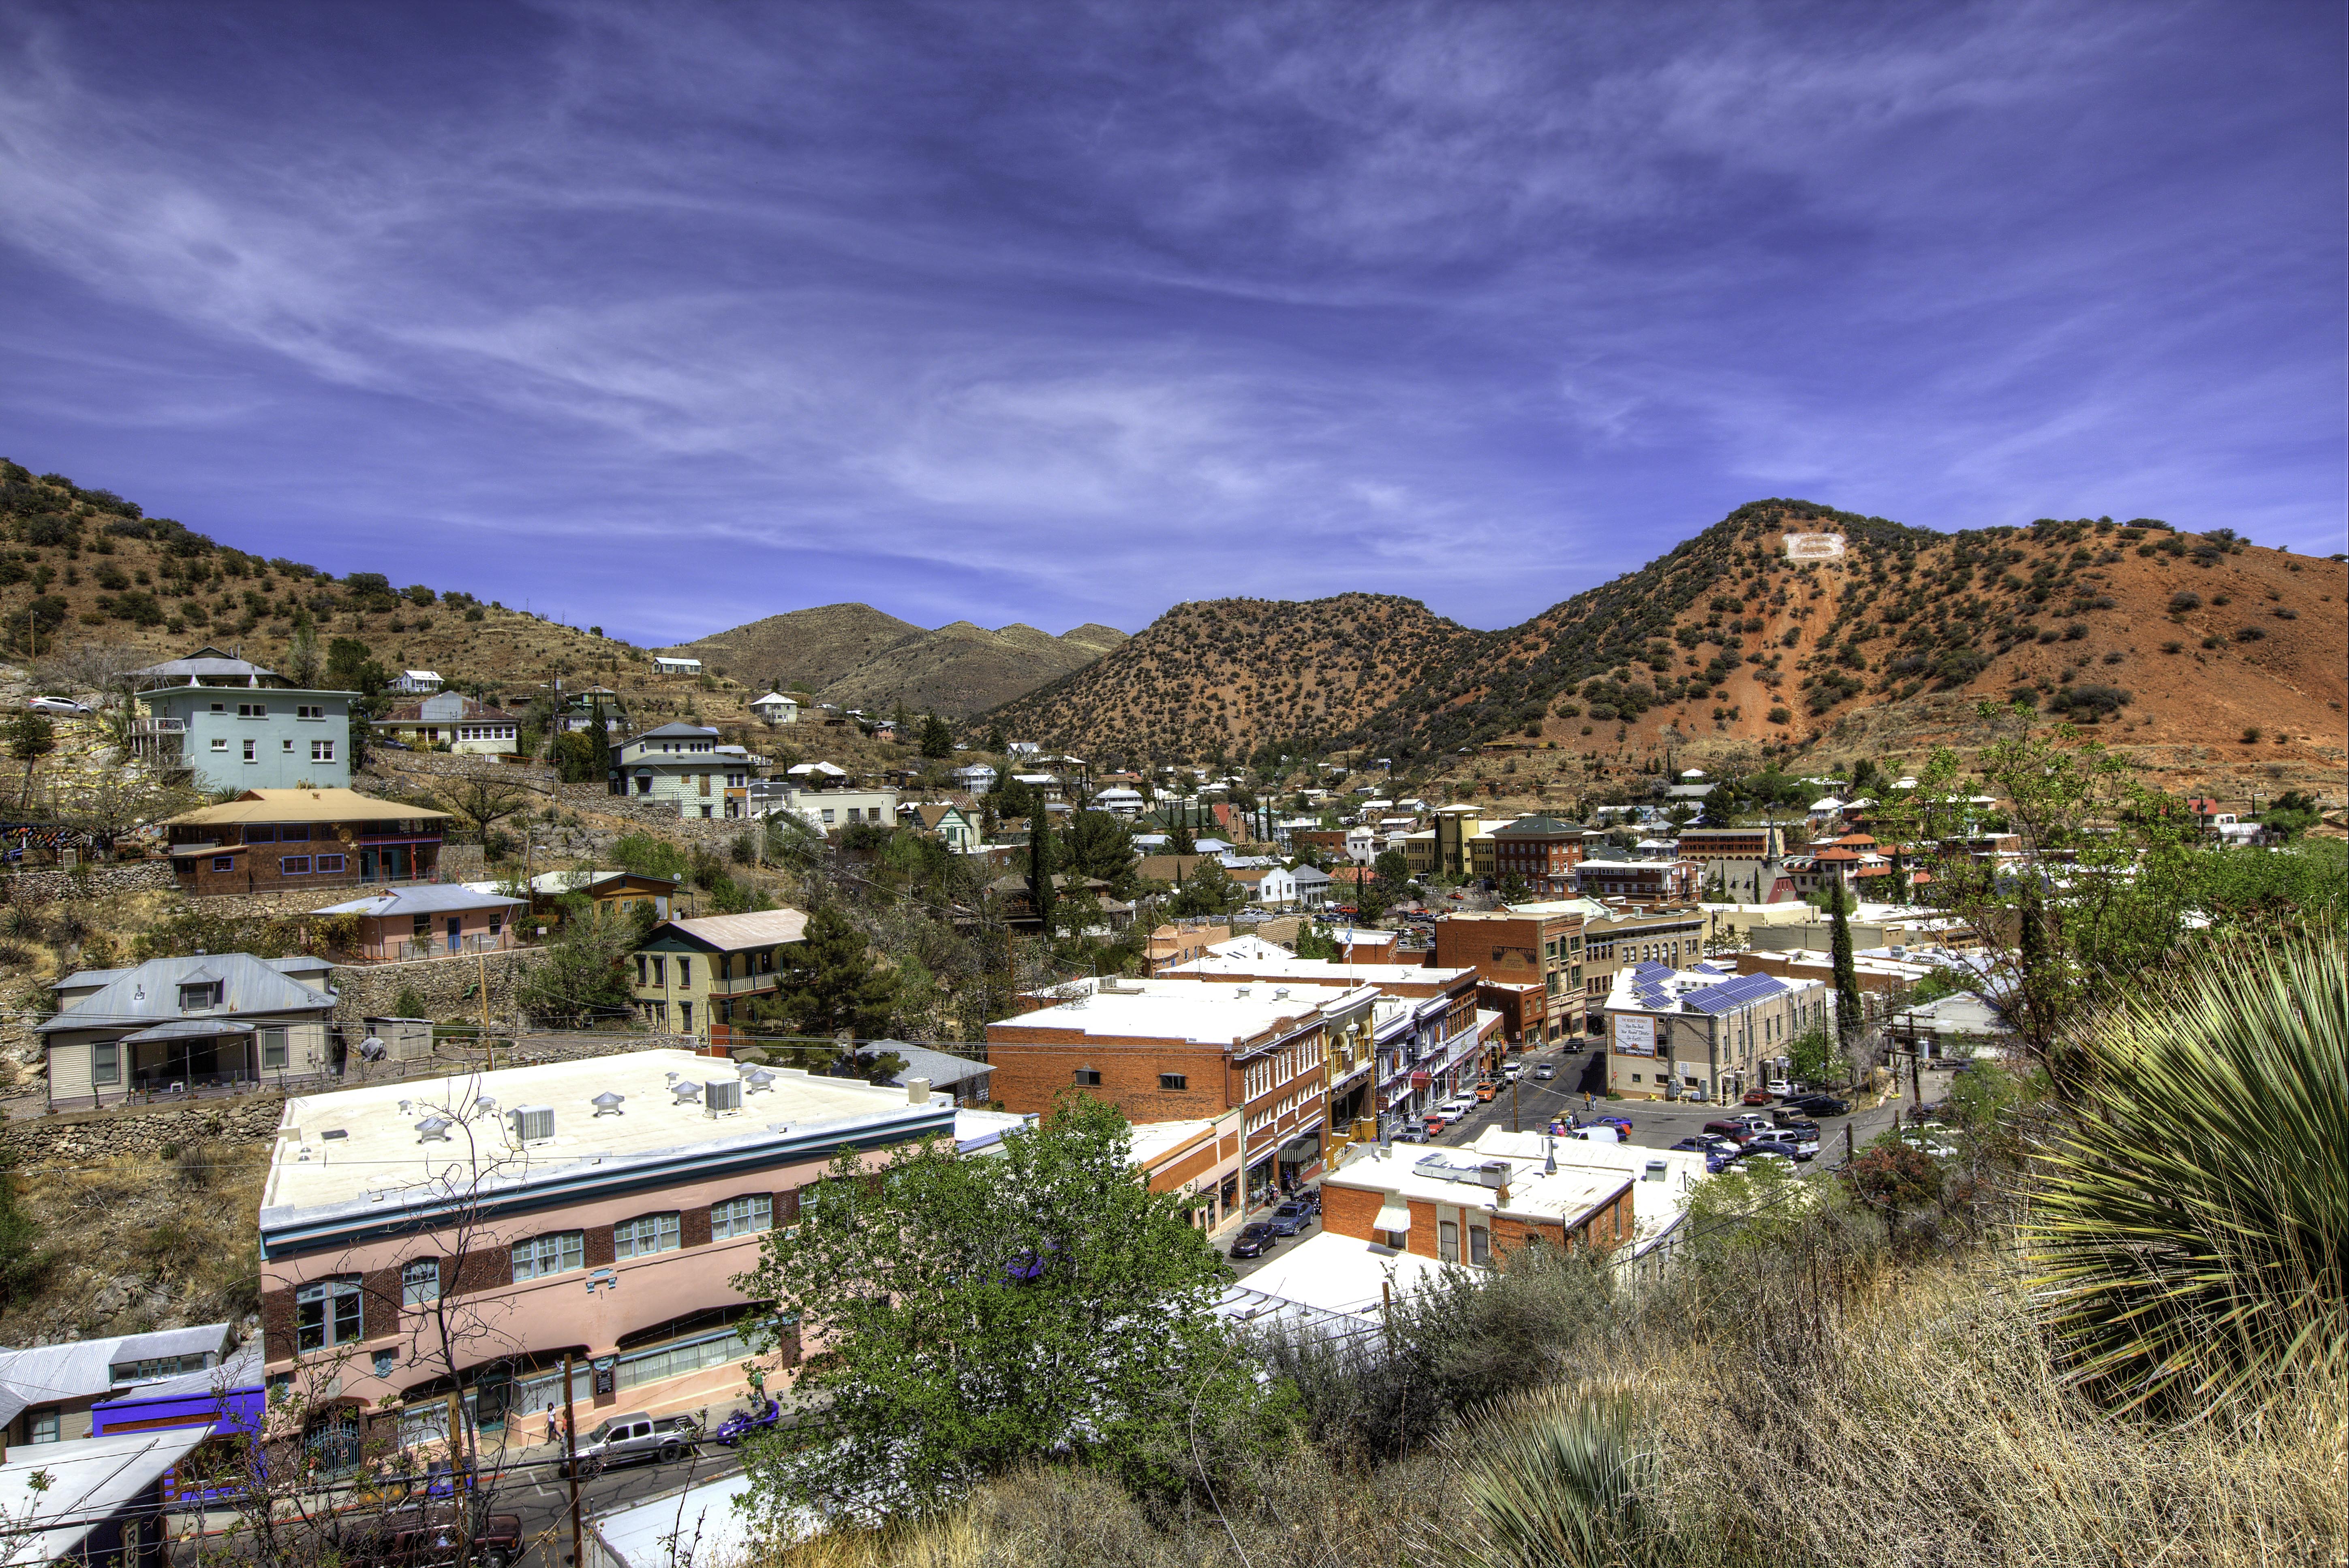 You are currently viewing Bisbee ~ Not just an Old Mining Town